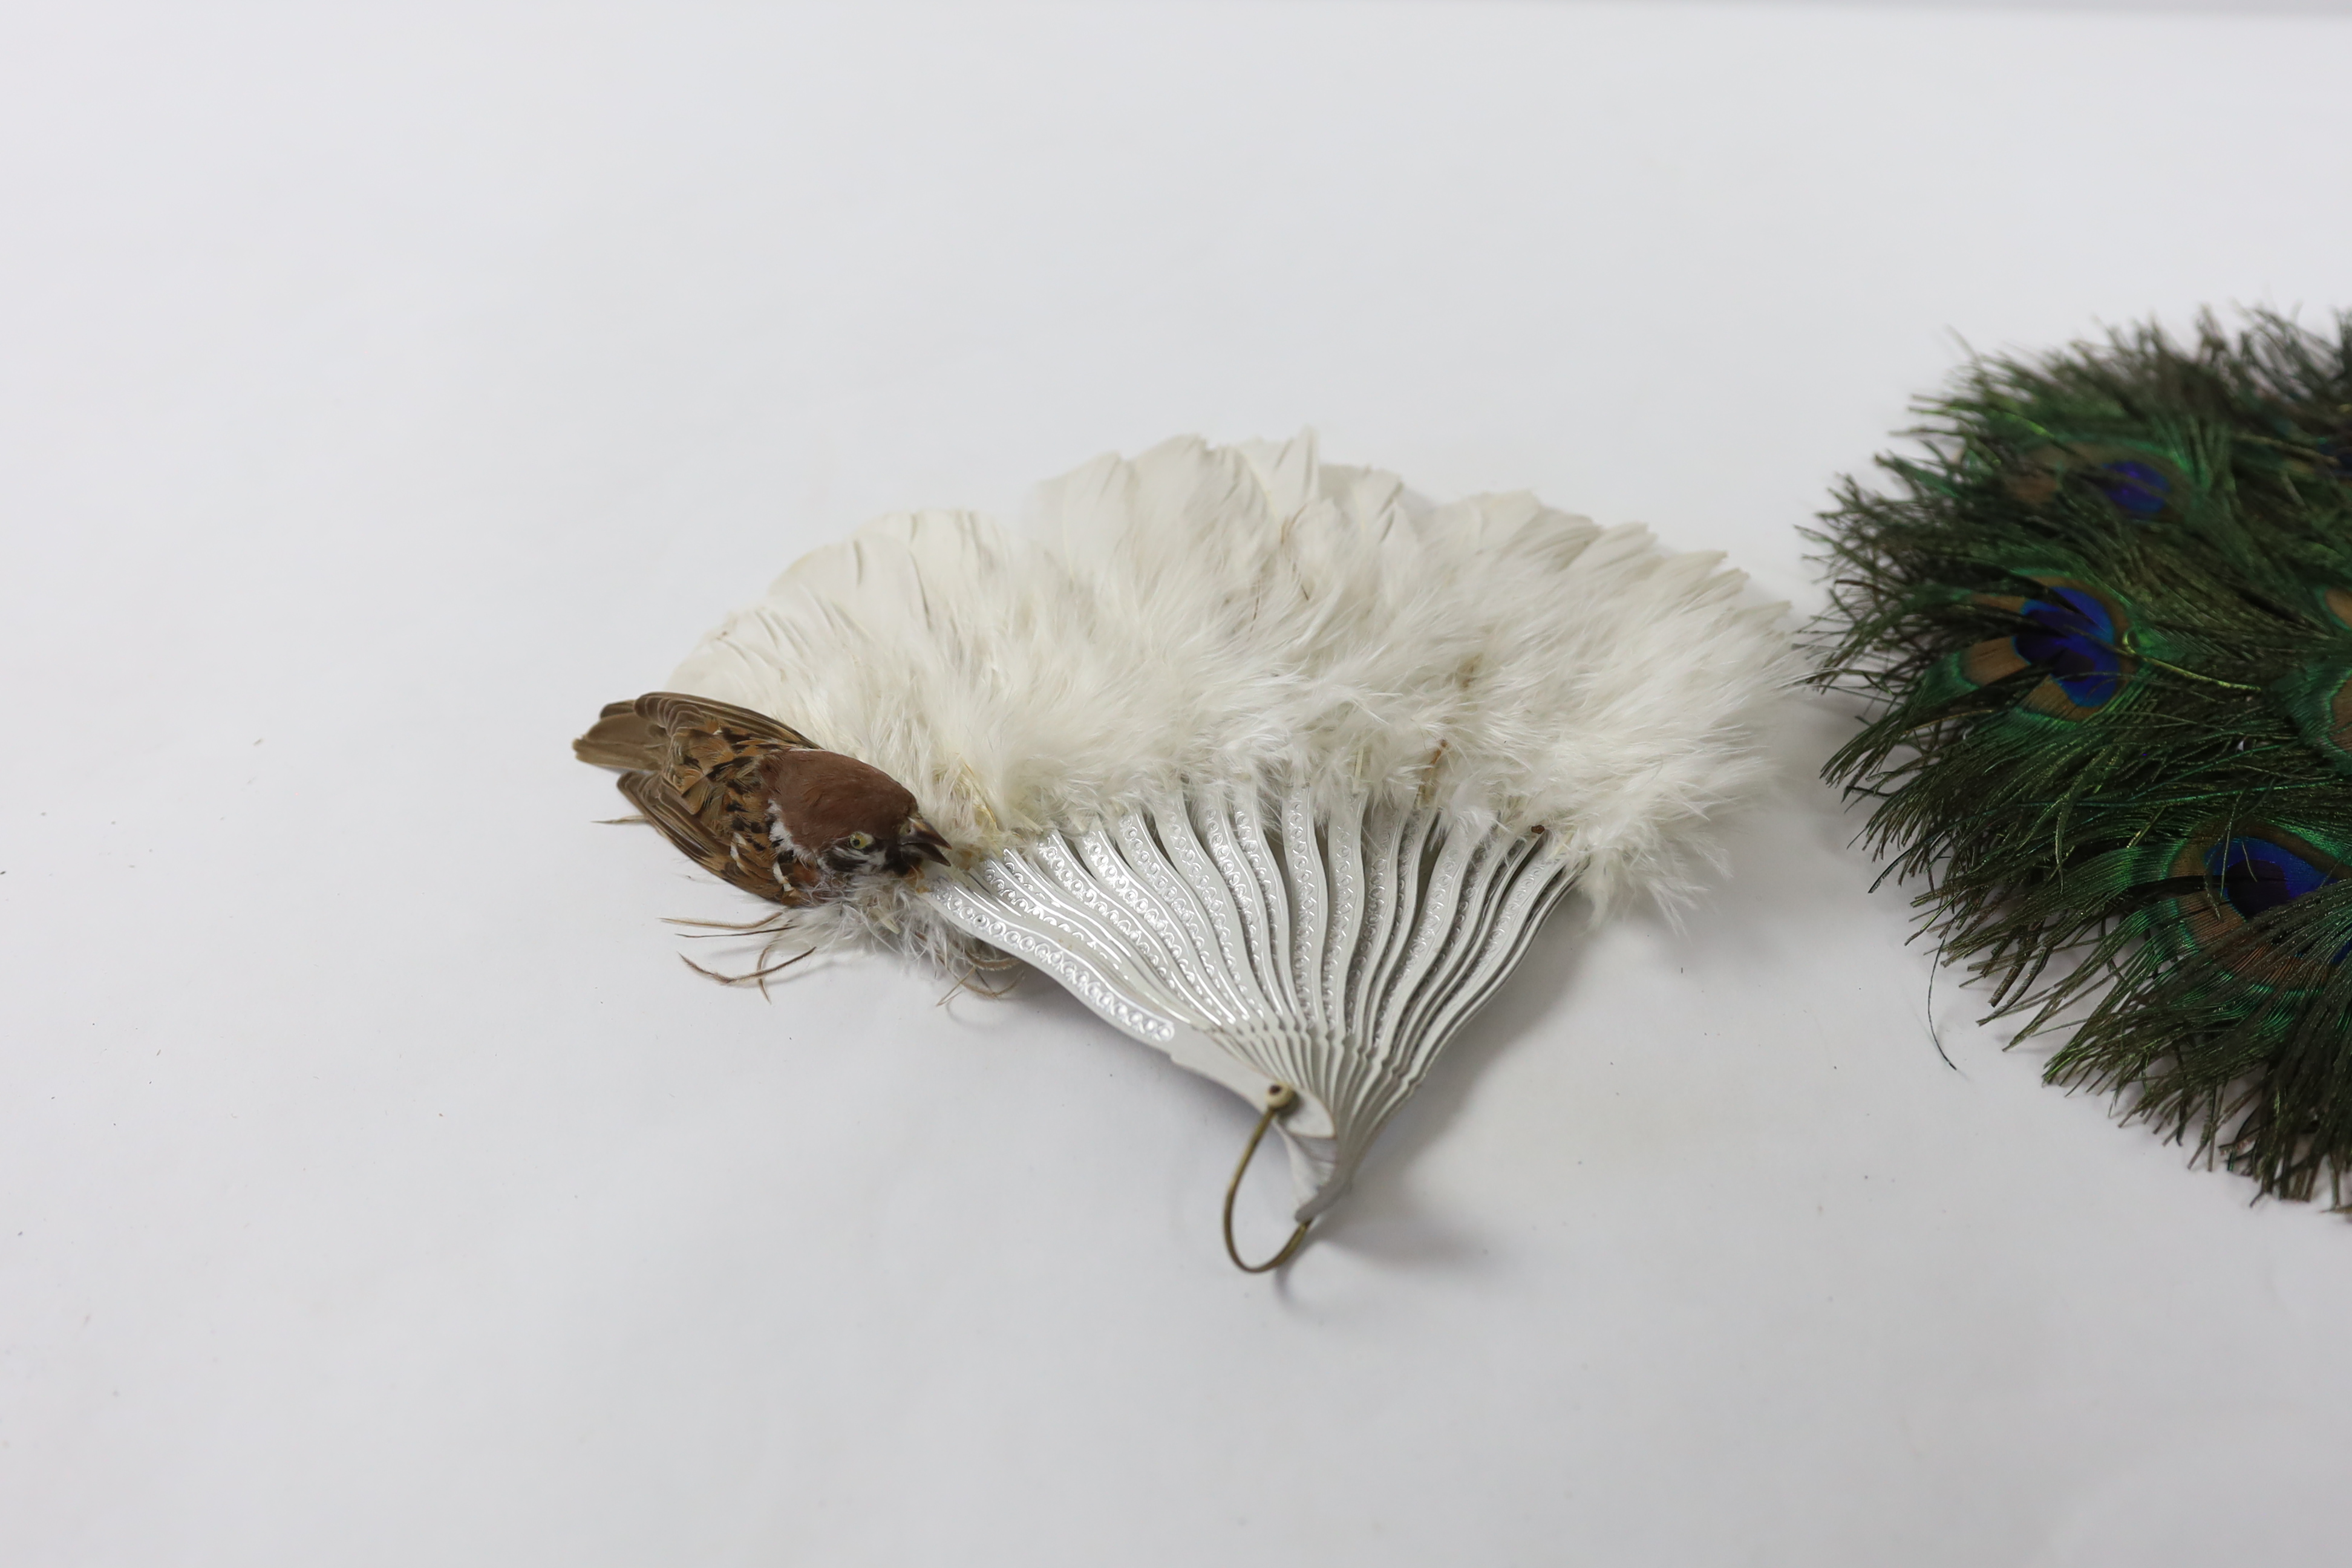 Two Edwardian early 1920’s feather fans with unusual bird decoration together with a peacock fan, one with cream Bakelite handle and guards, feather leaf and bird decoration, the other with silver painted guards, feather